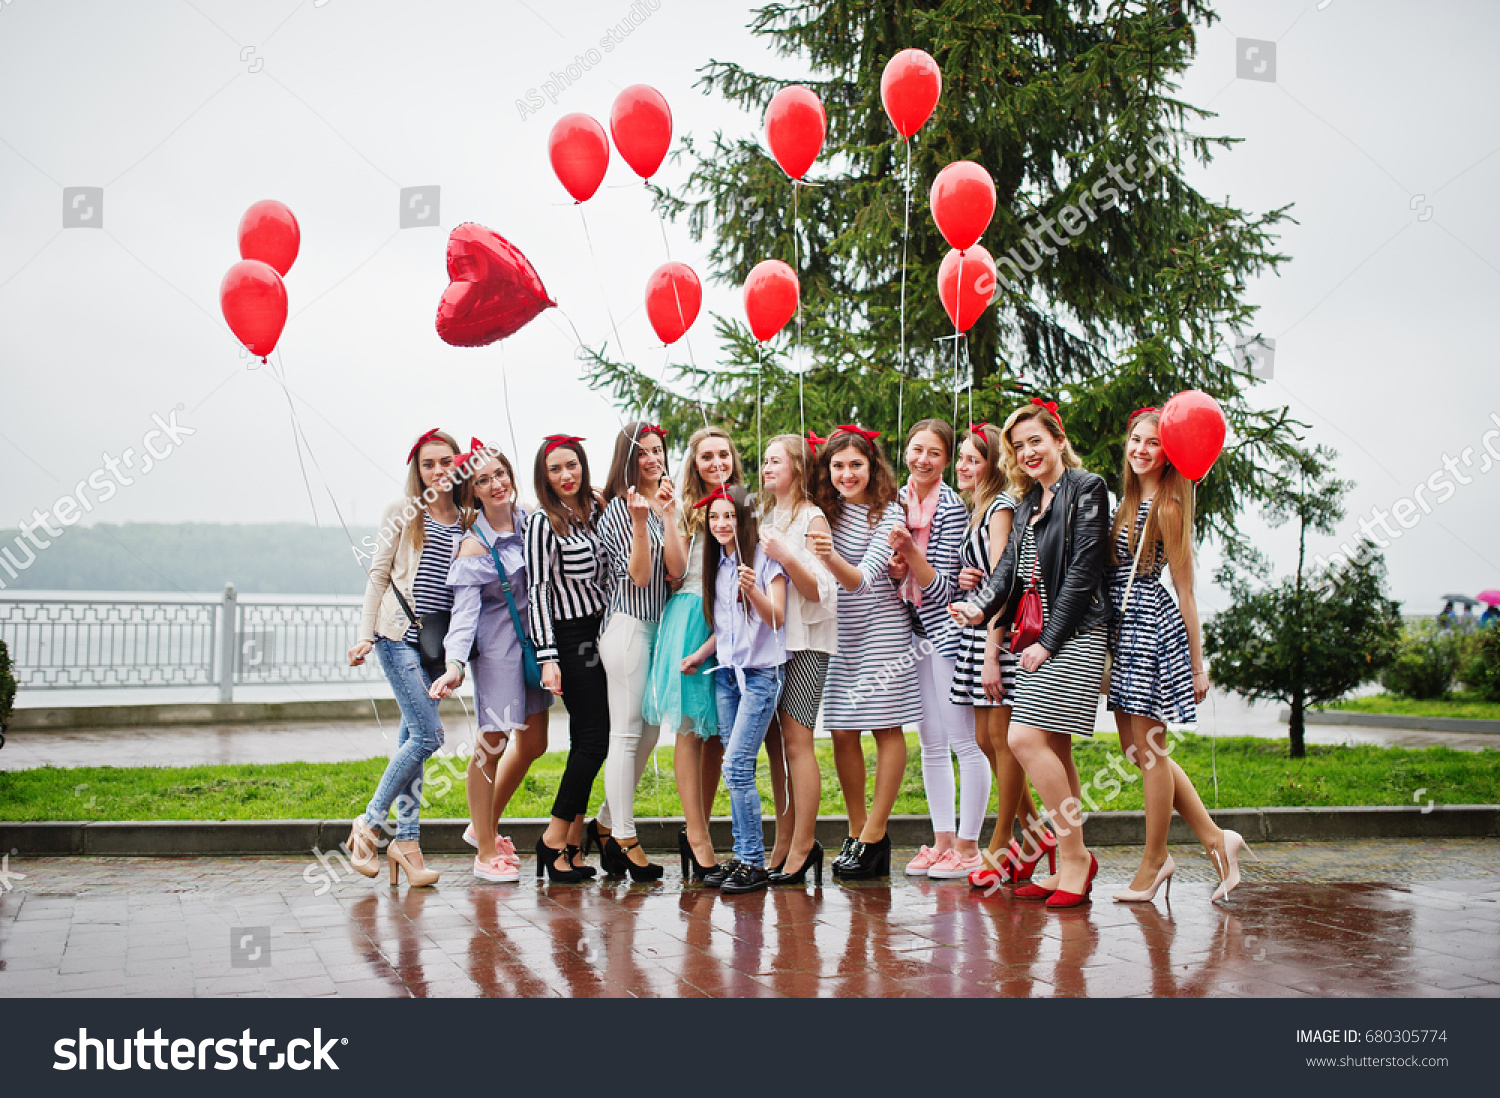 Eleven amazingly-looking braidsmaids with stunning bride posing with red heart-shaped balloons on the pavement against the lake in the background. #680305774